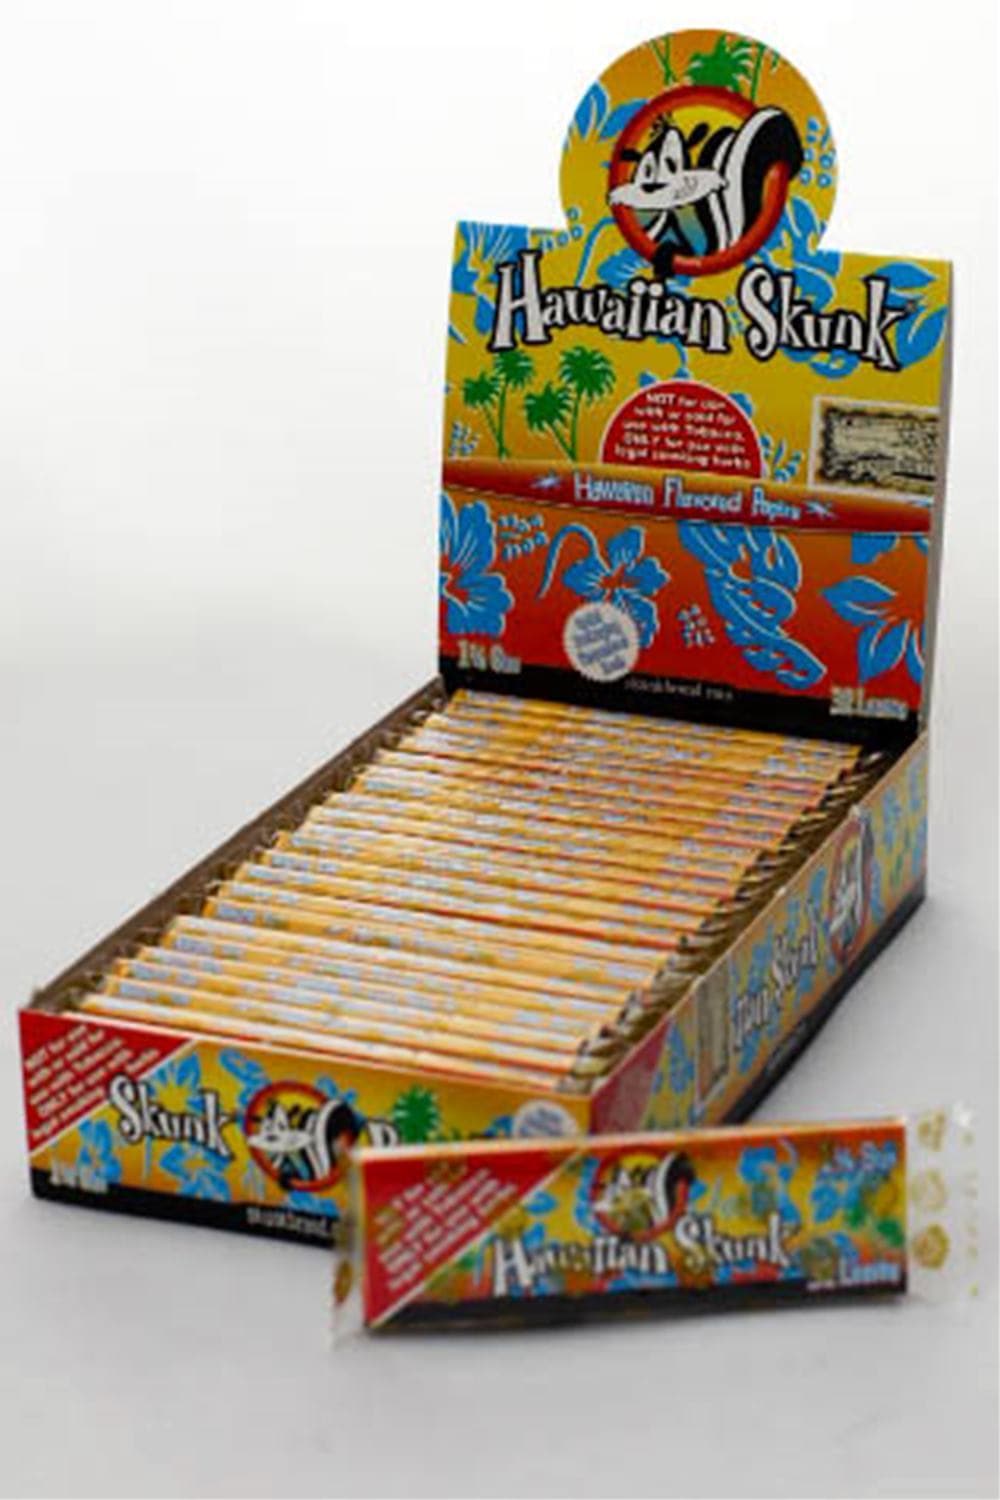 Skunk Brand sneaky delicious flavors papers